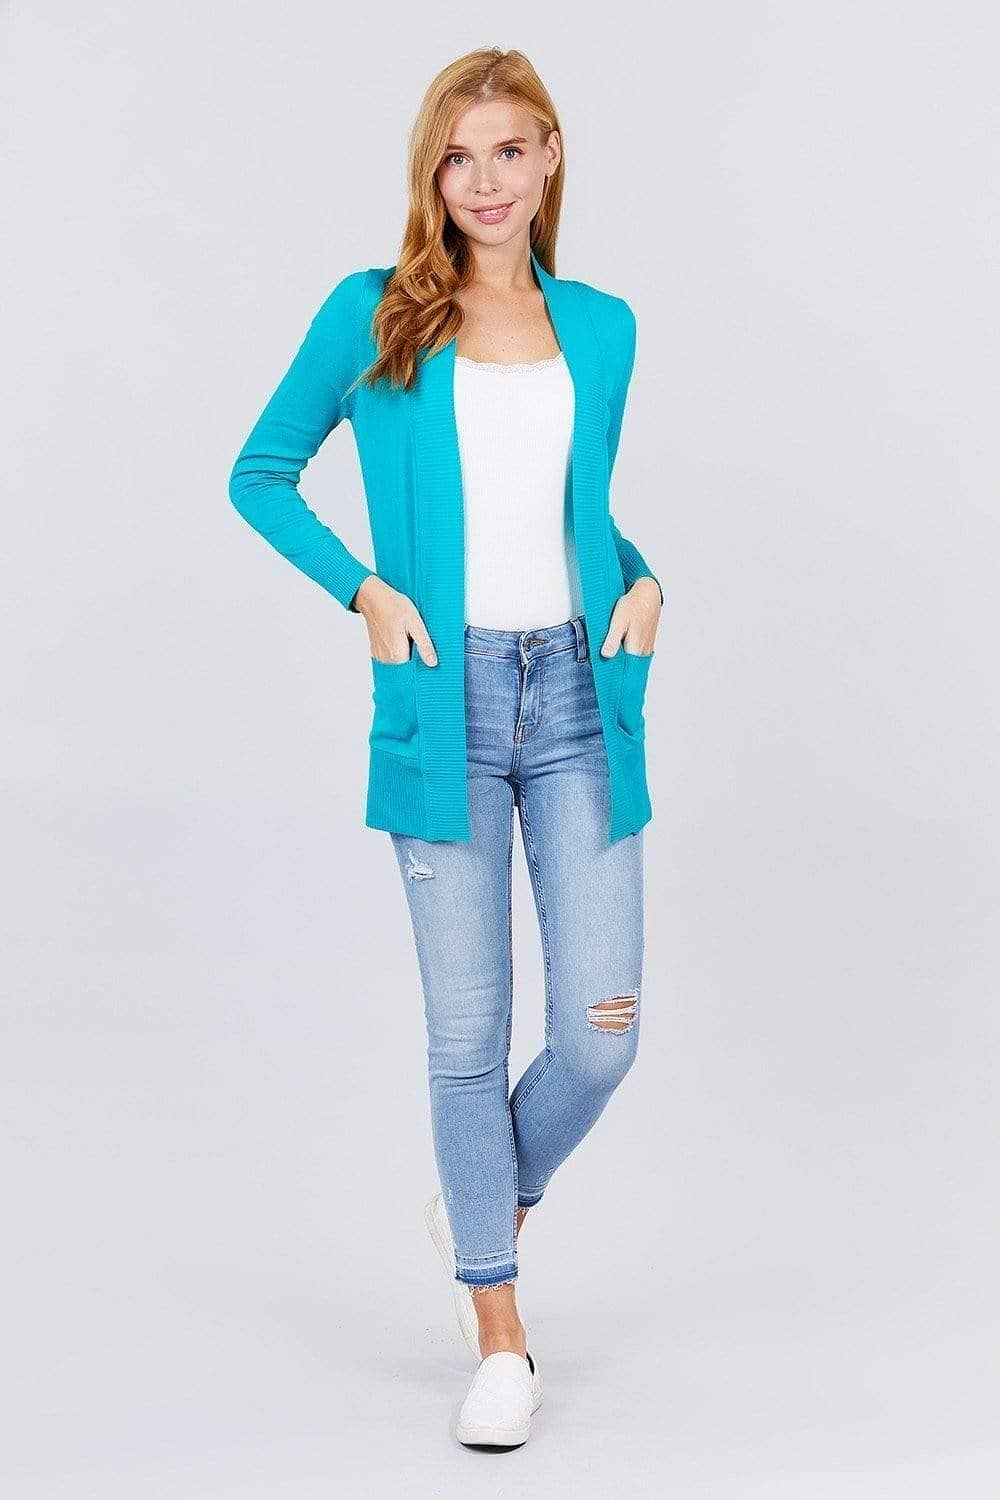 Turquoise Long Sleeve Open-Front Rib Knit Cardigan - Shopping Therapy, LLC Cardigan